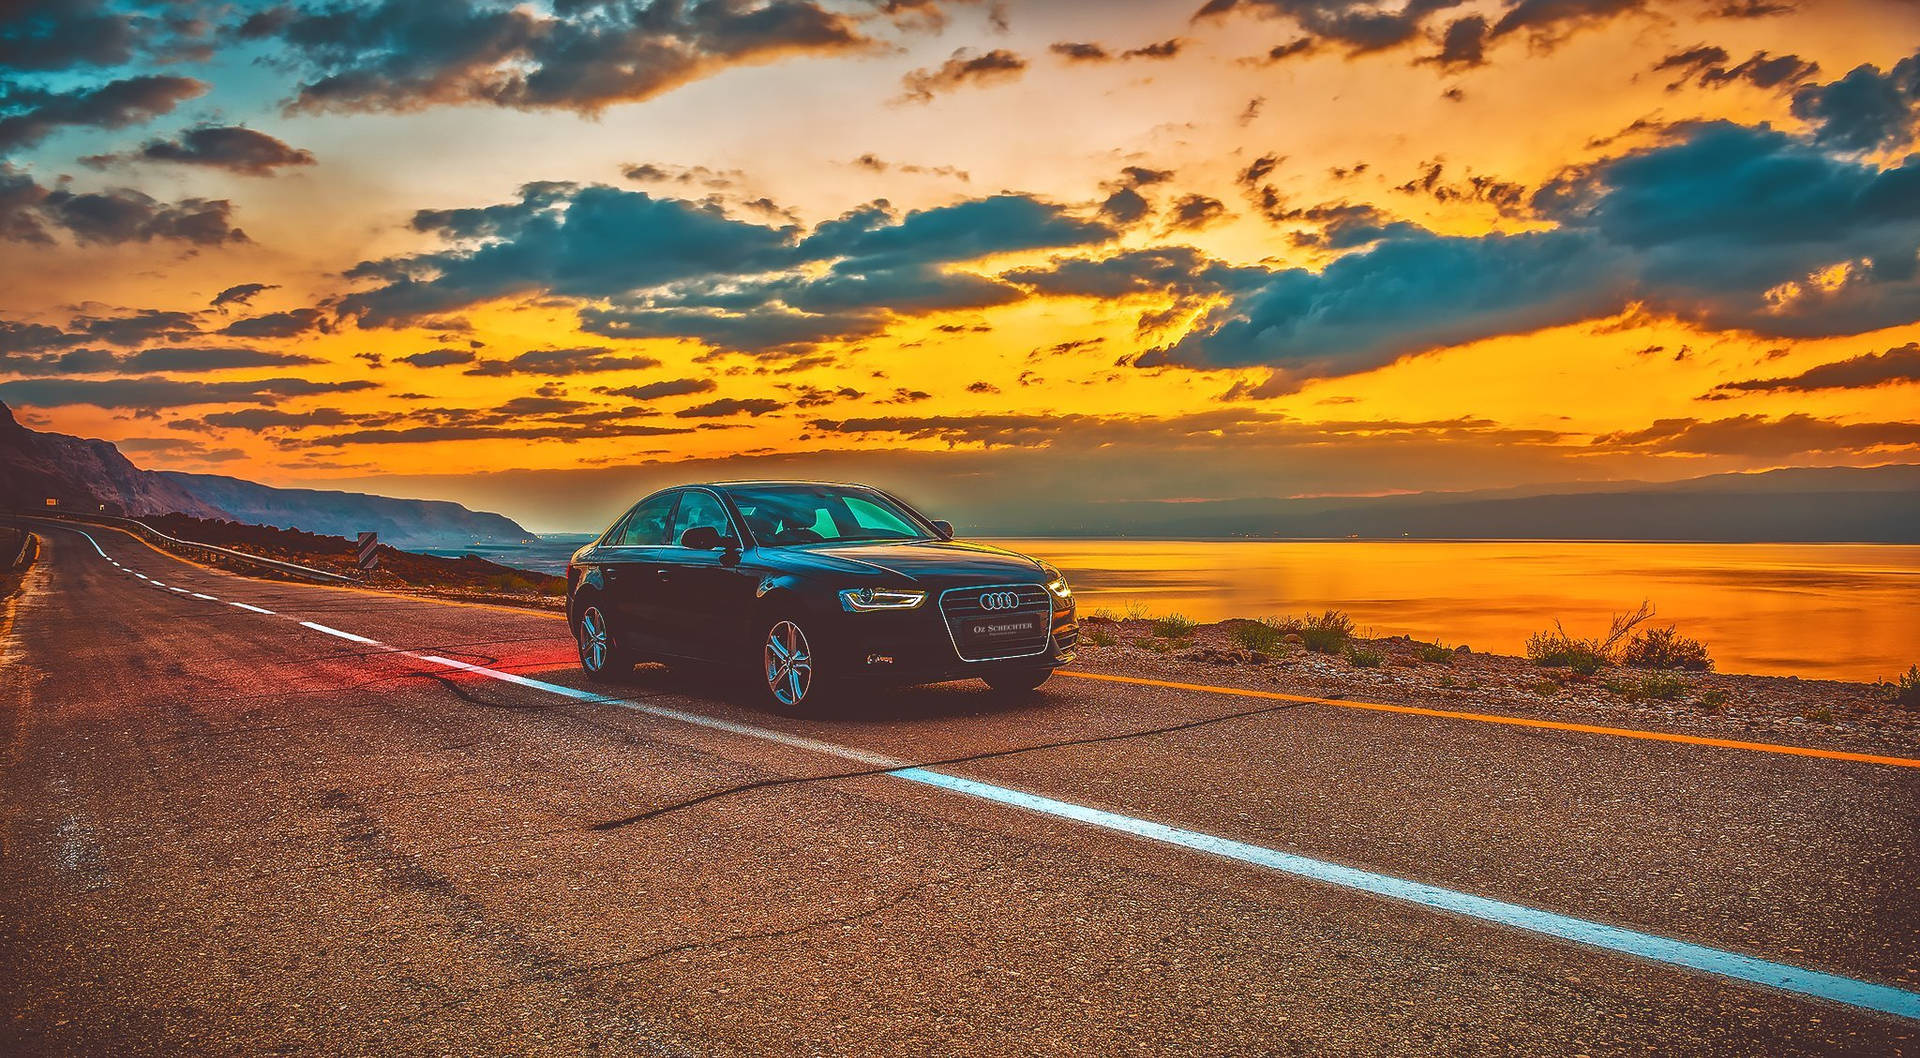 Audi A4 Sunset Road Photography Wallpaper